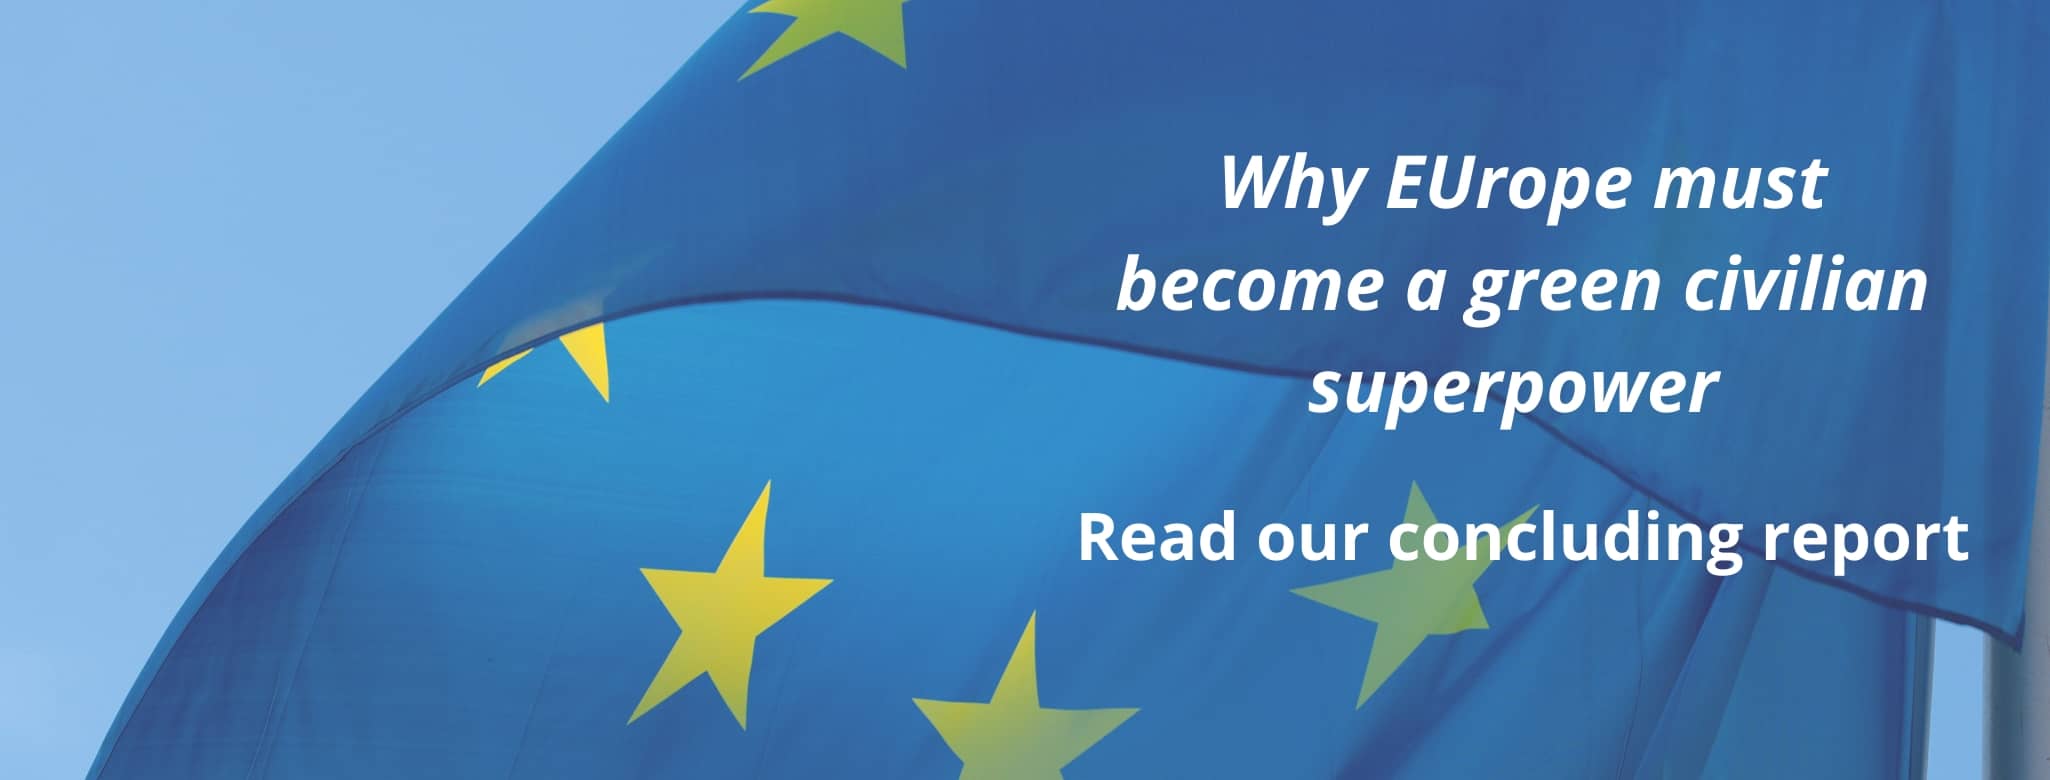 Why Europe must become a green civilian superpower - read our concluding report